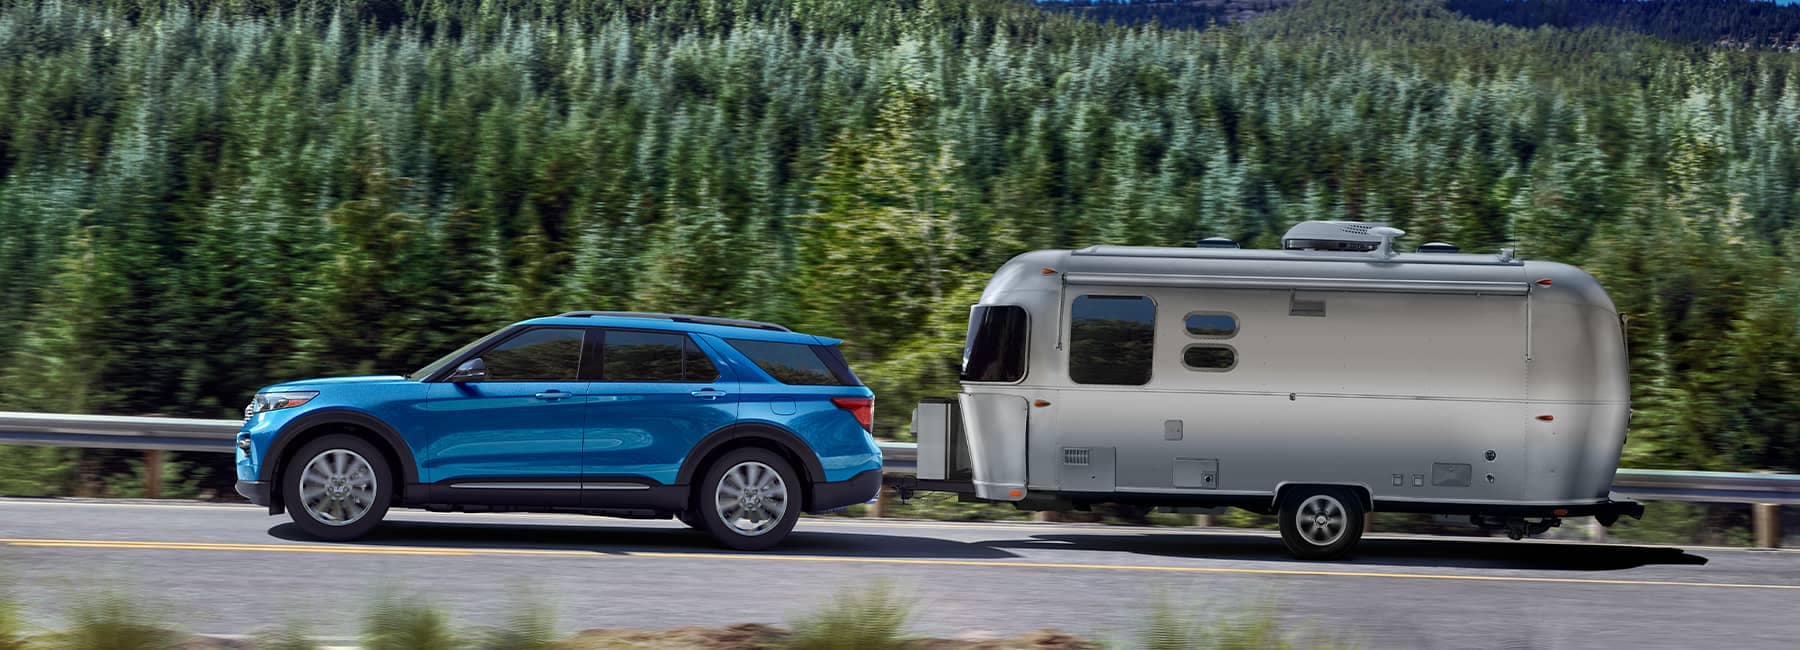 Blue 2021 Ford Explorer hauling a silver camper through a forest